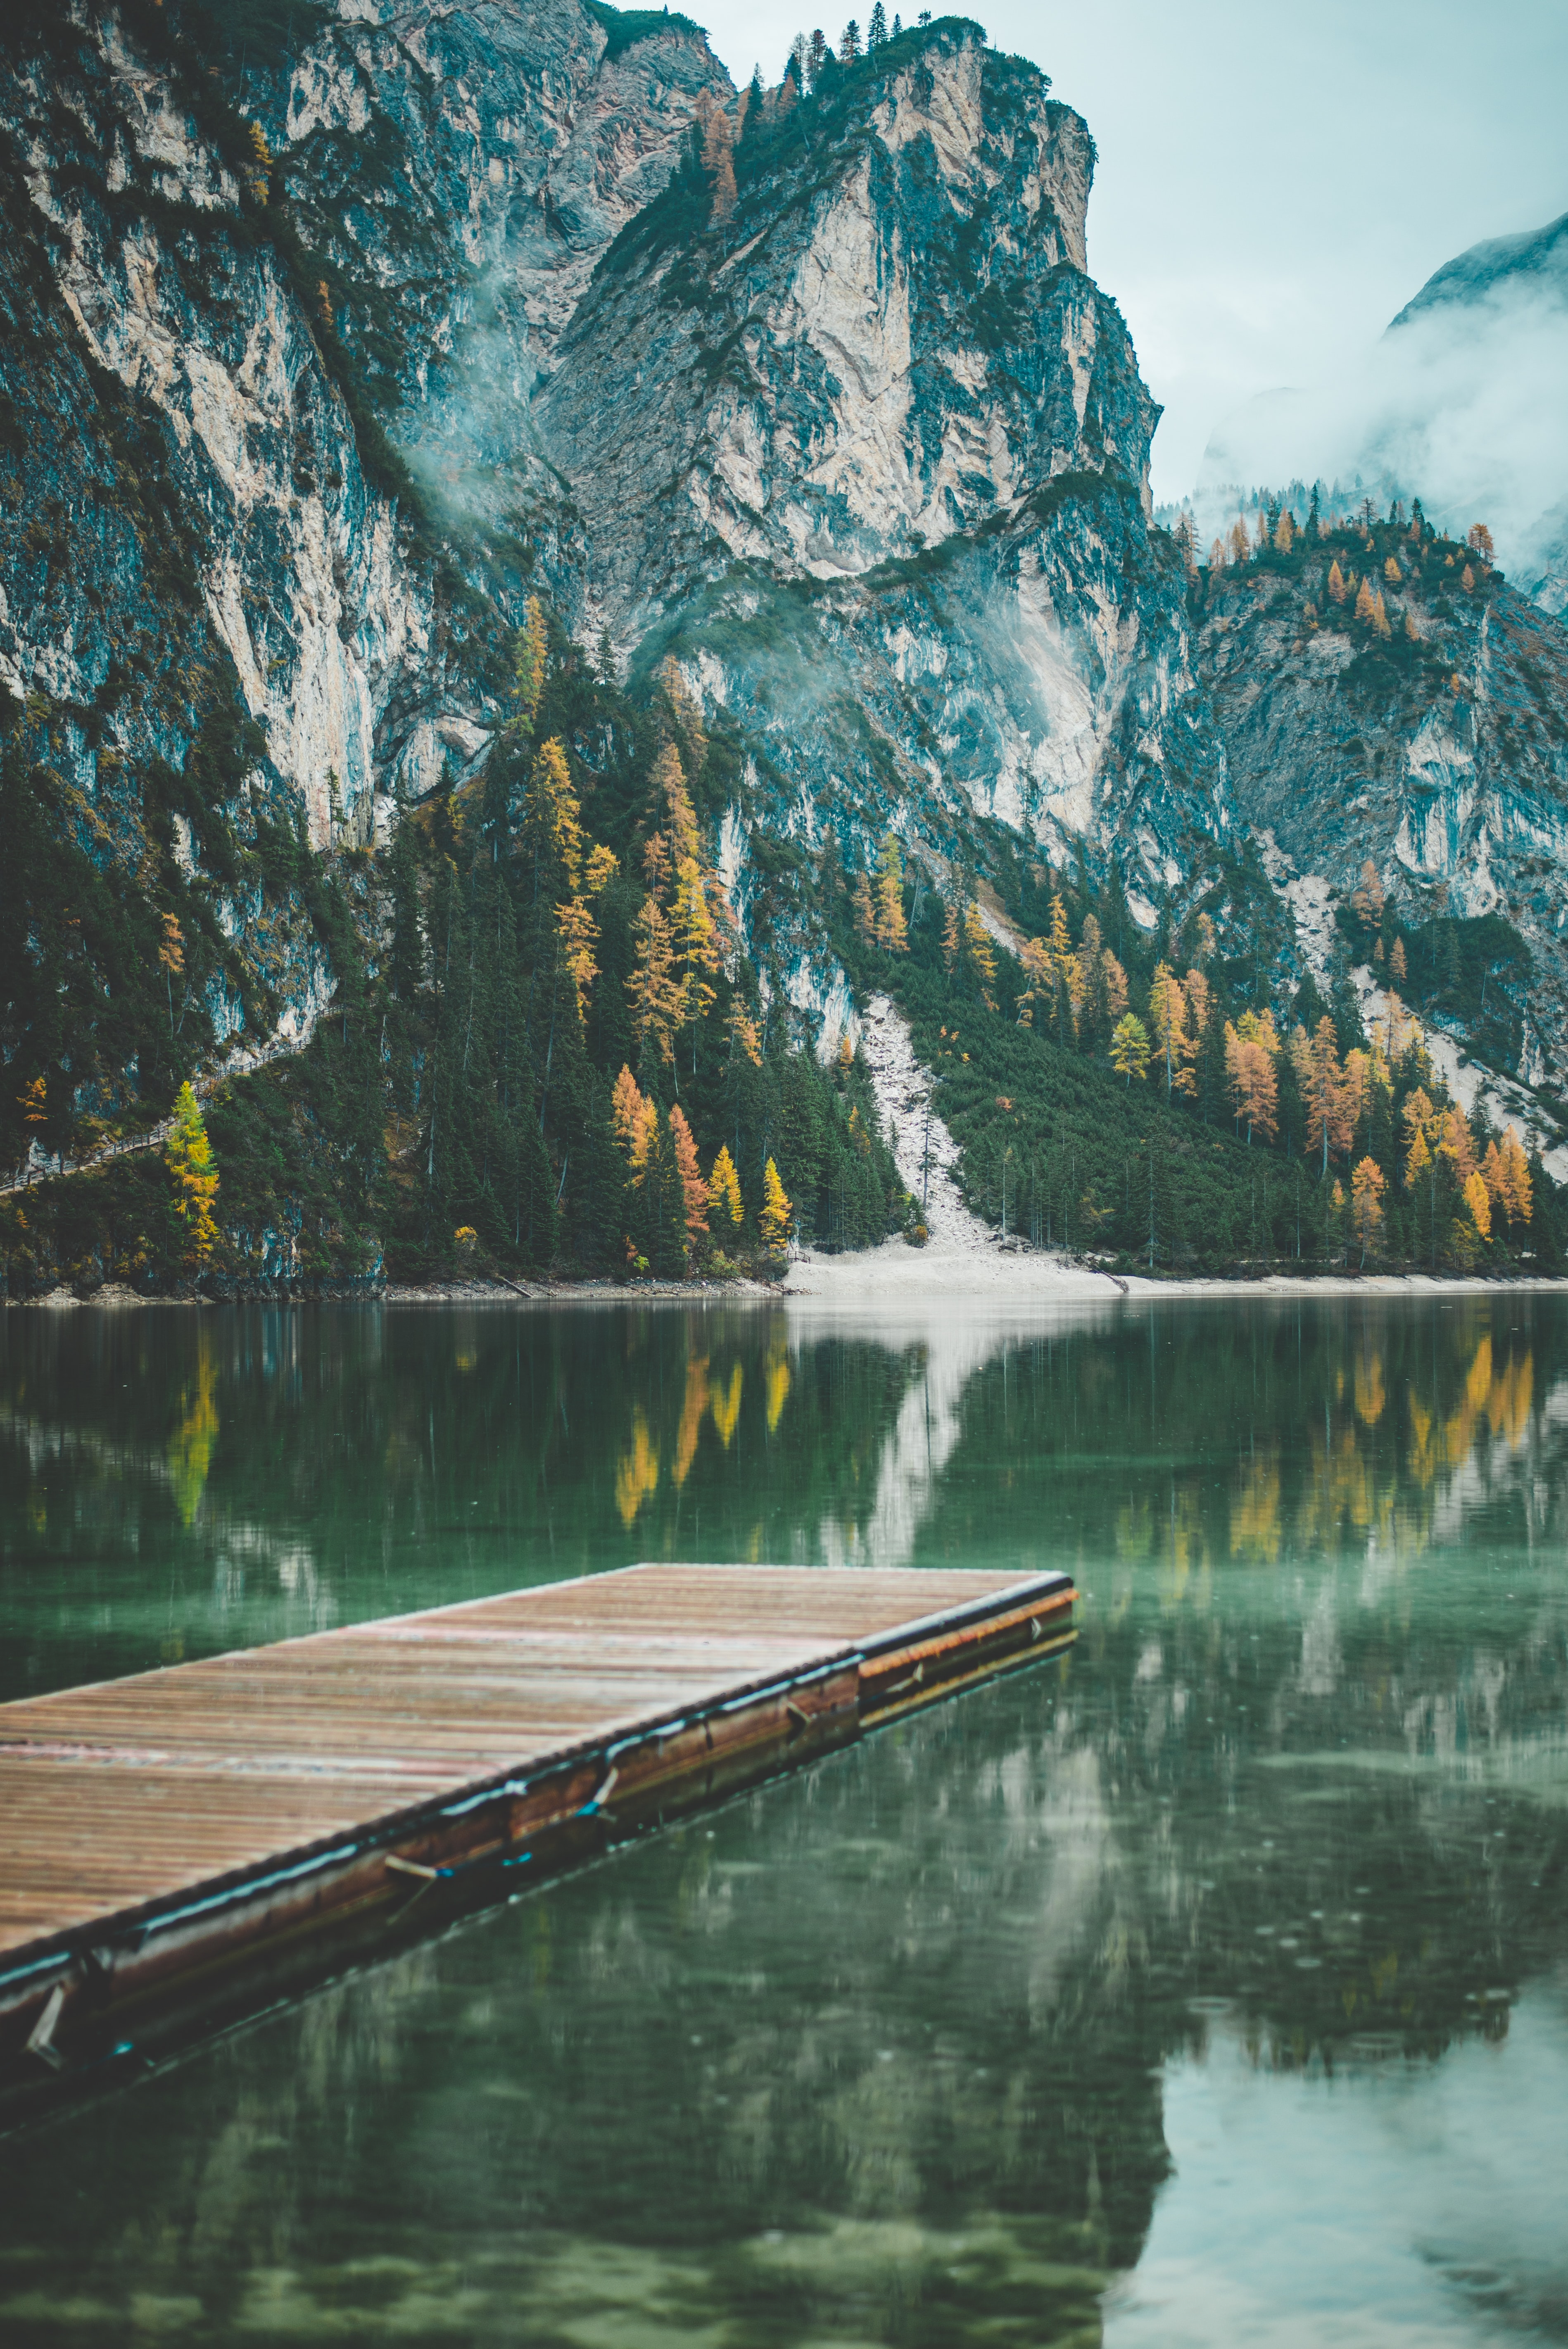 vertical wallpaper italy, mountains, pier, nature, trees, lake, reflection